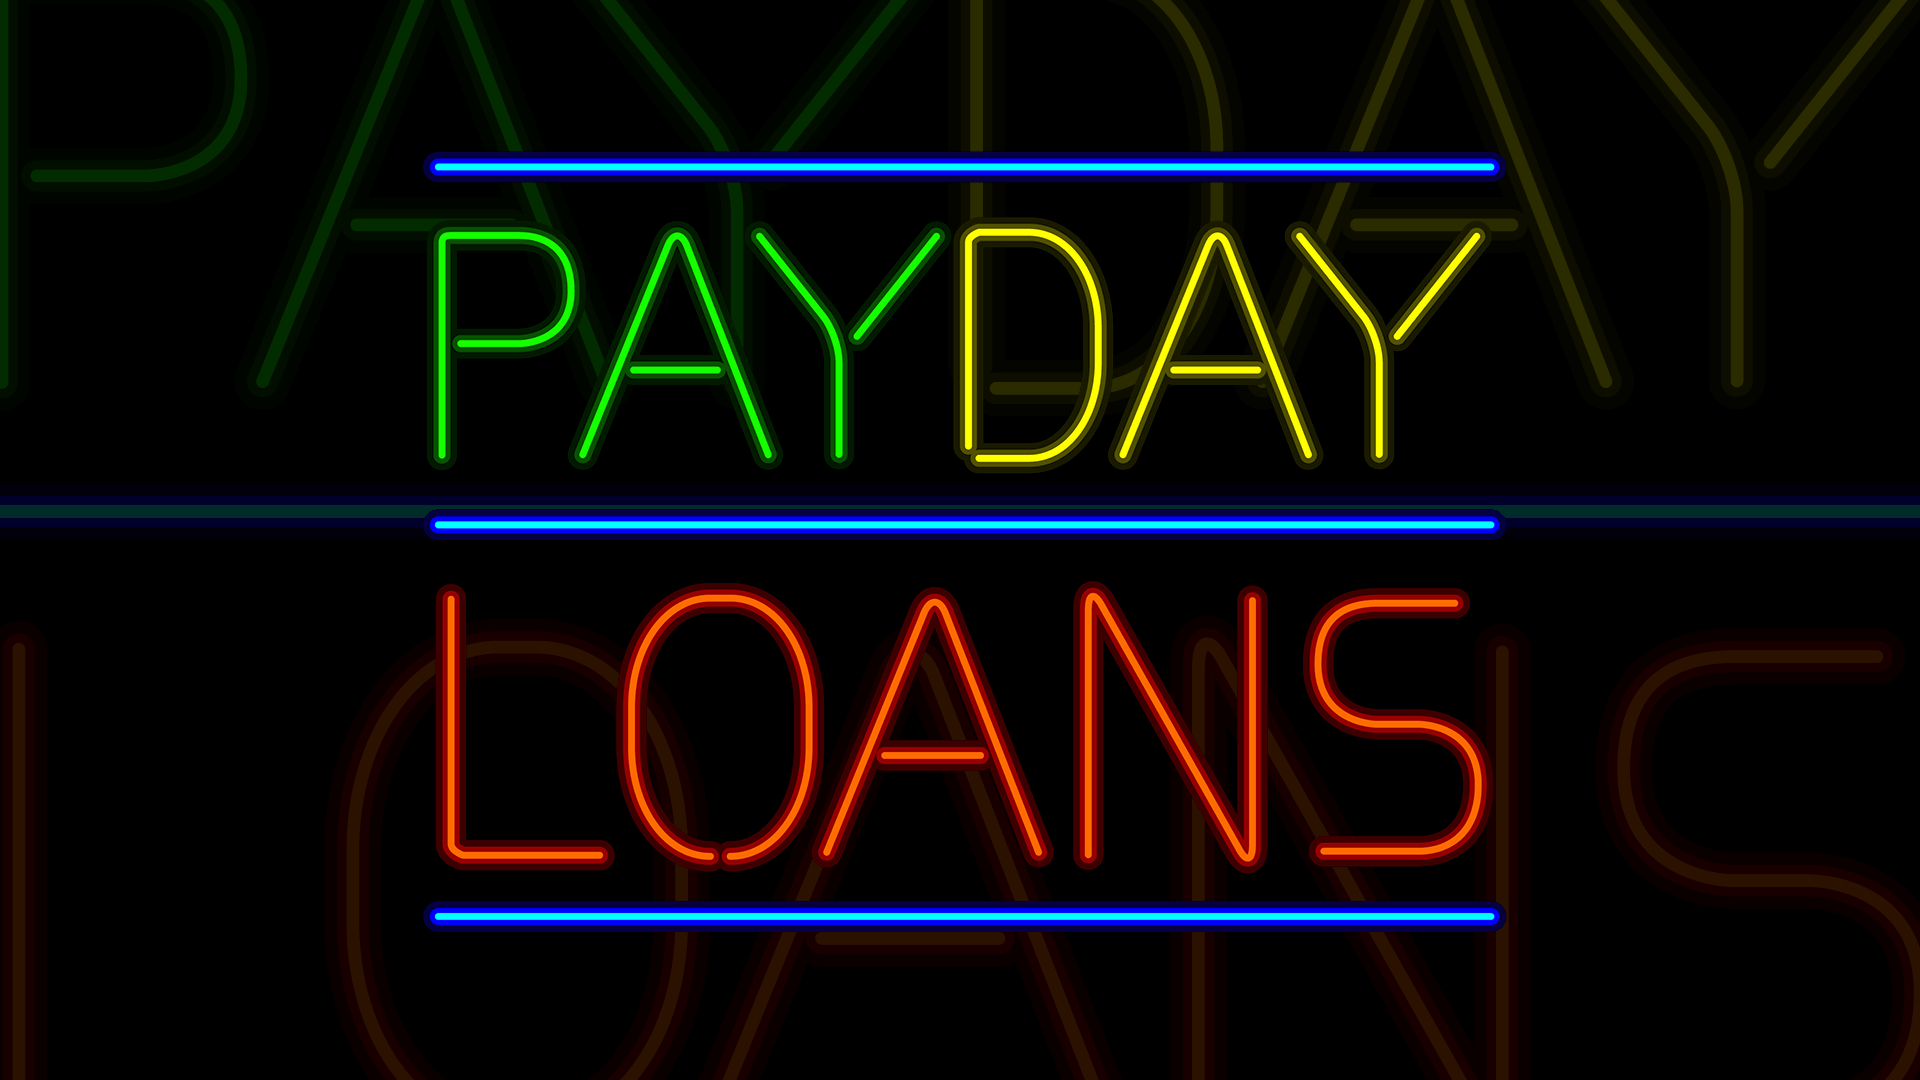 payday-loans-ss-1920